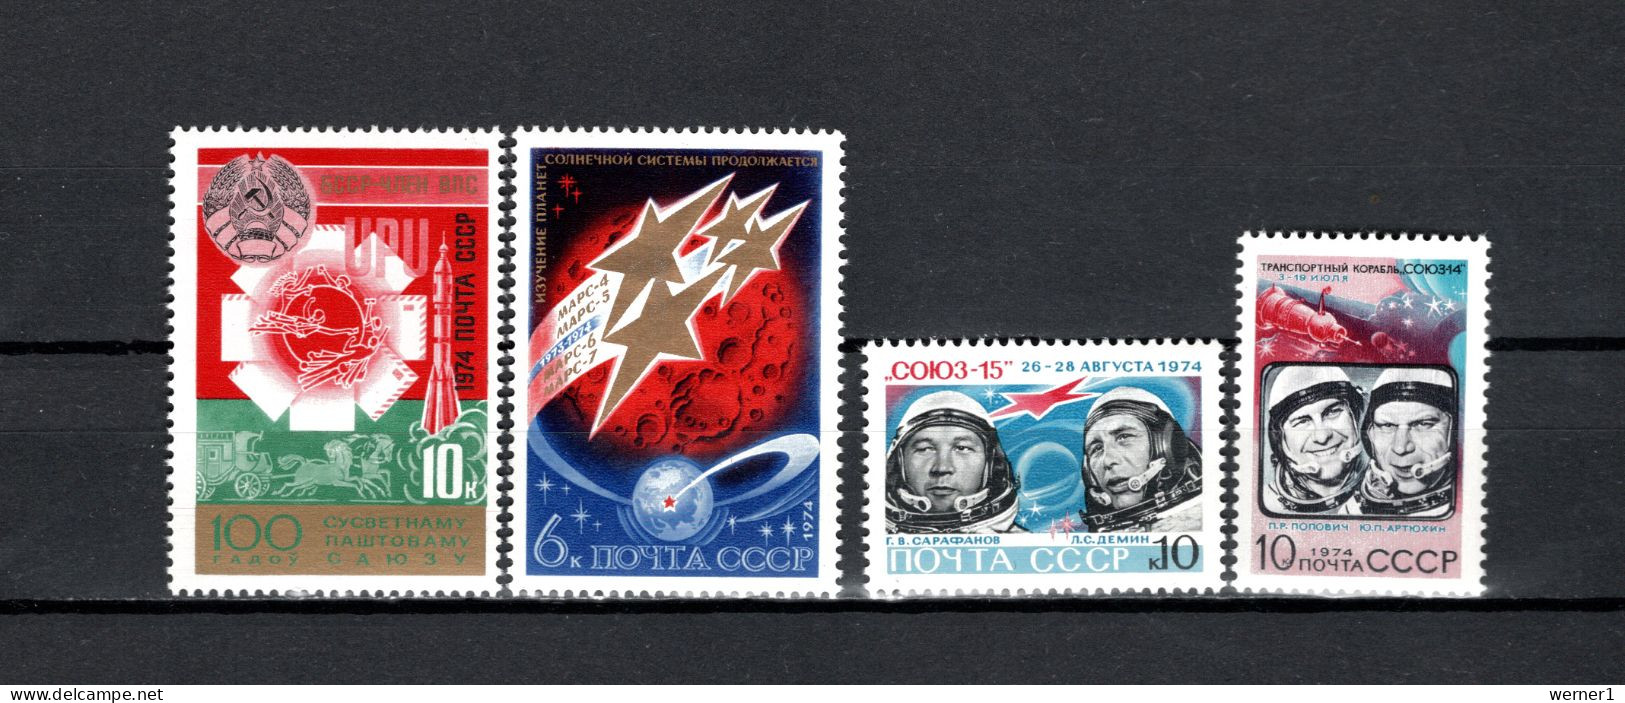 USSR Russia 1974 Space, UPU Centenary, Space Achievement, Soyuz 14 And 15, 4 Stamps MNH - Rusland En USSR